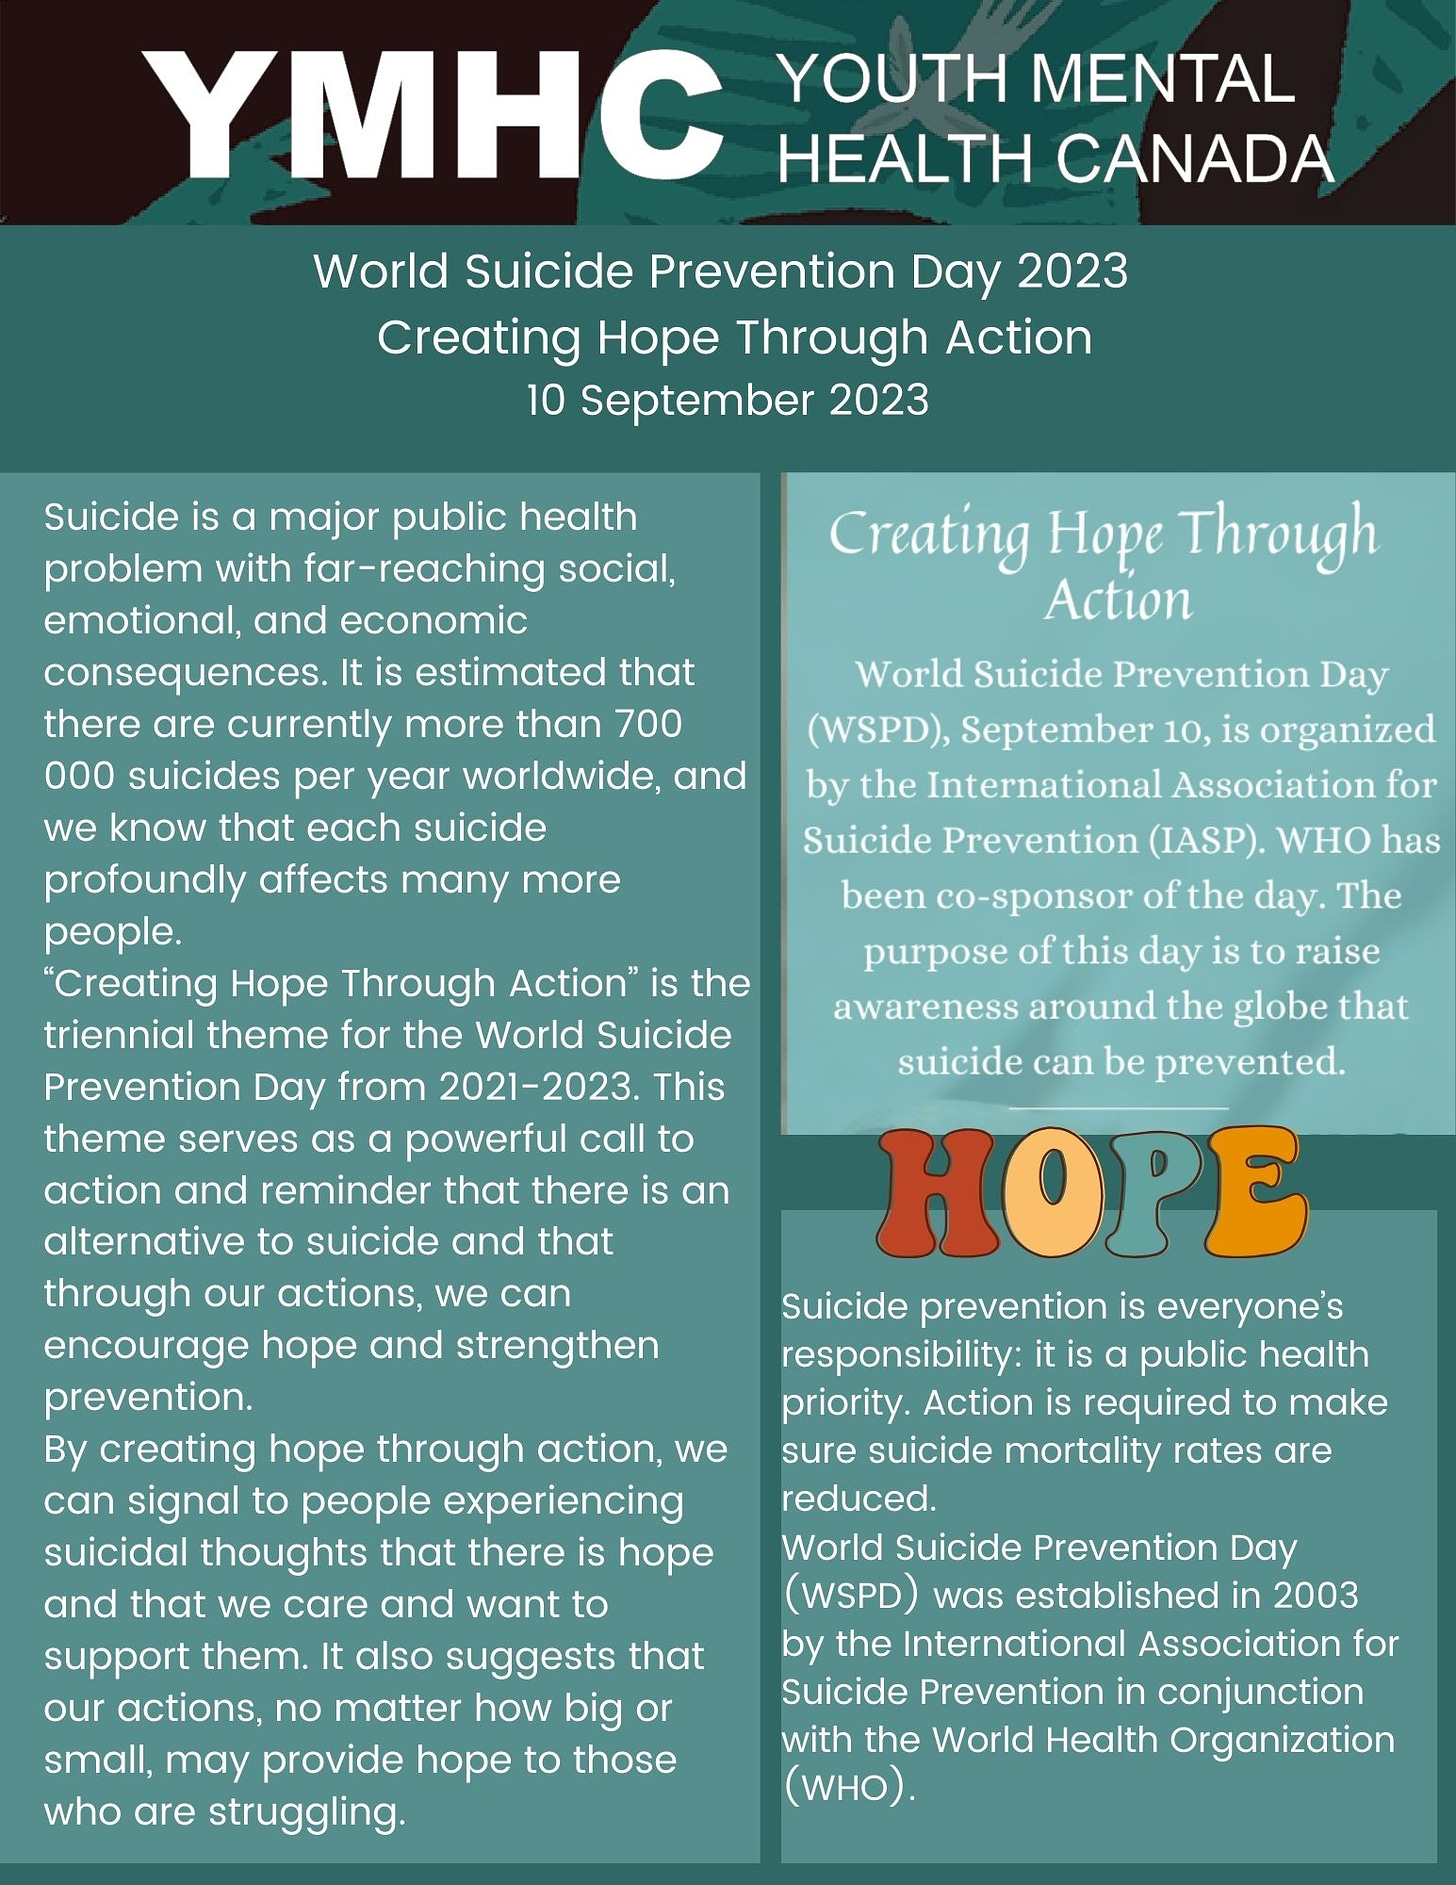 Suicide is a major public health problem with far-reaching social, emotional, and economic consequences. It is estimated that there are currently more than 700 000 suicides per year worldwide, and we know that each suicide profoundly affects many more people. “Creating Hope Through Action” is the triennial theme for the World Suicide Prevention Day from 2021-2023. This theme serves as a powerful call to action and reminder that there is an alternative to suicide and that through our actions, we can encourage hope and strengthen prevention. By creating hope through action, we can signal to people experiencing suicidal thoughts that there is hope and that we care and want to support them. It also suggests that our actions, no matter how big or small, may provide hope to those who are struggling.  Suicide prevention is everyone’s responsibility: it is a public health priority. Action is required to make sure suicide mortality rates are reduced.  World Suicide Prevention Day (WSPD) was established in 2003 by the International Association for Suicide Prevention in conjunction with the World Health Organization (WHO).